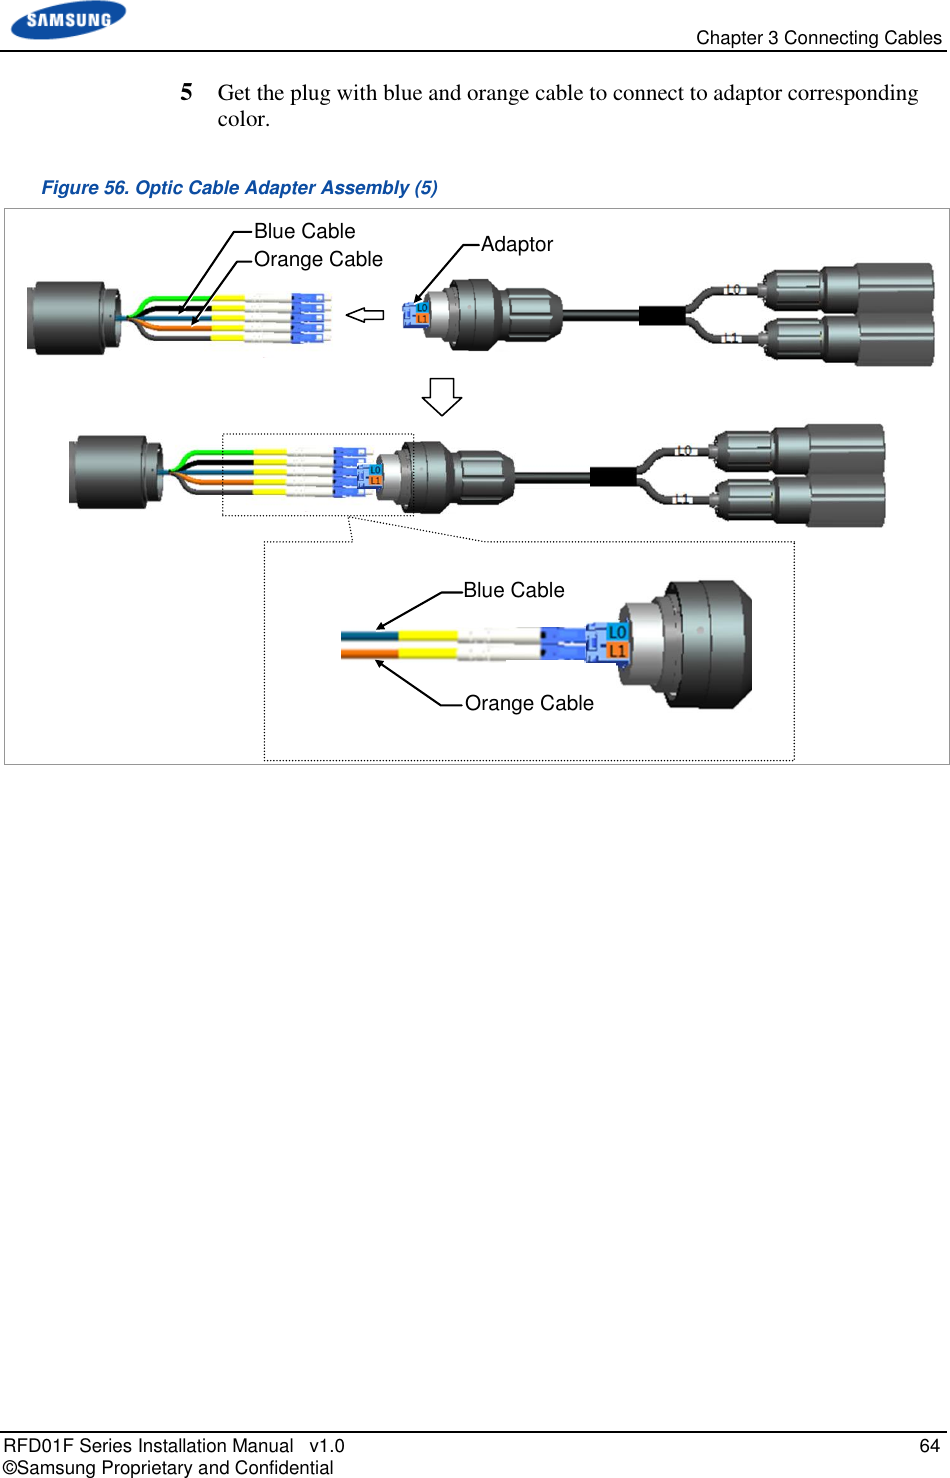   Chapter 3 Connecting Cables RFD01F Series Installation Manual   v1.0   64 © Samsung Proprietary and Confidential 5  Get the plug with blue and orange cable to connect to adaptor corresponding color. Figure 56. Optic Cable Adapter Assembly (5)     Adaptor Blue Cable Orange Cable  Blue Cable Orange Cable 